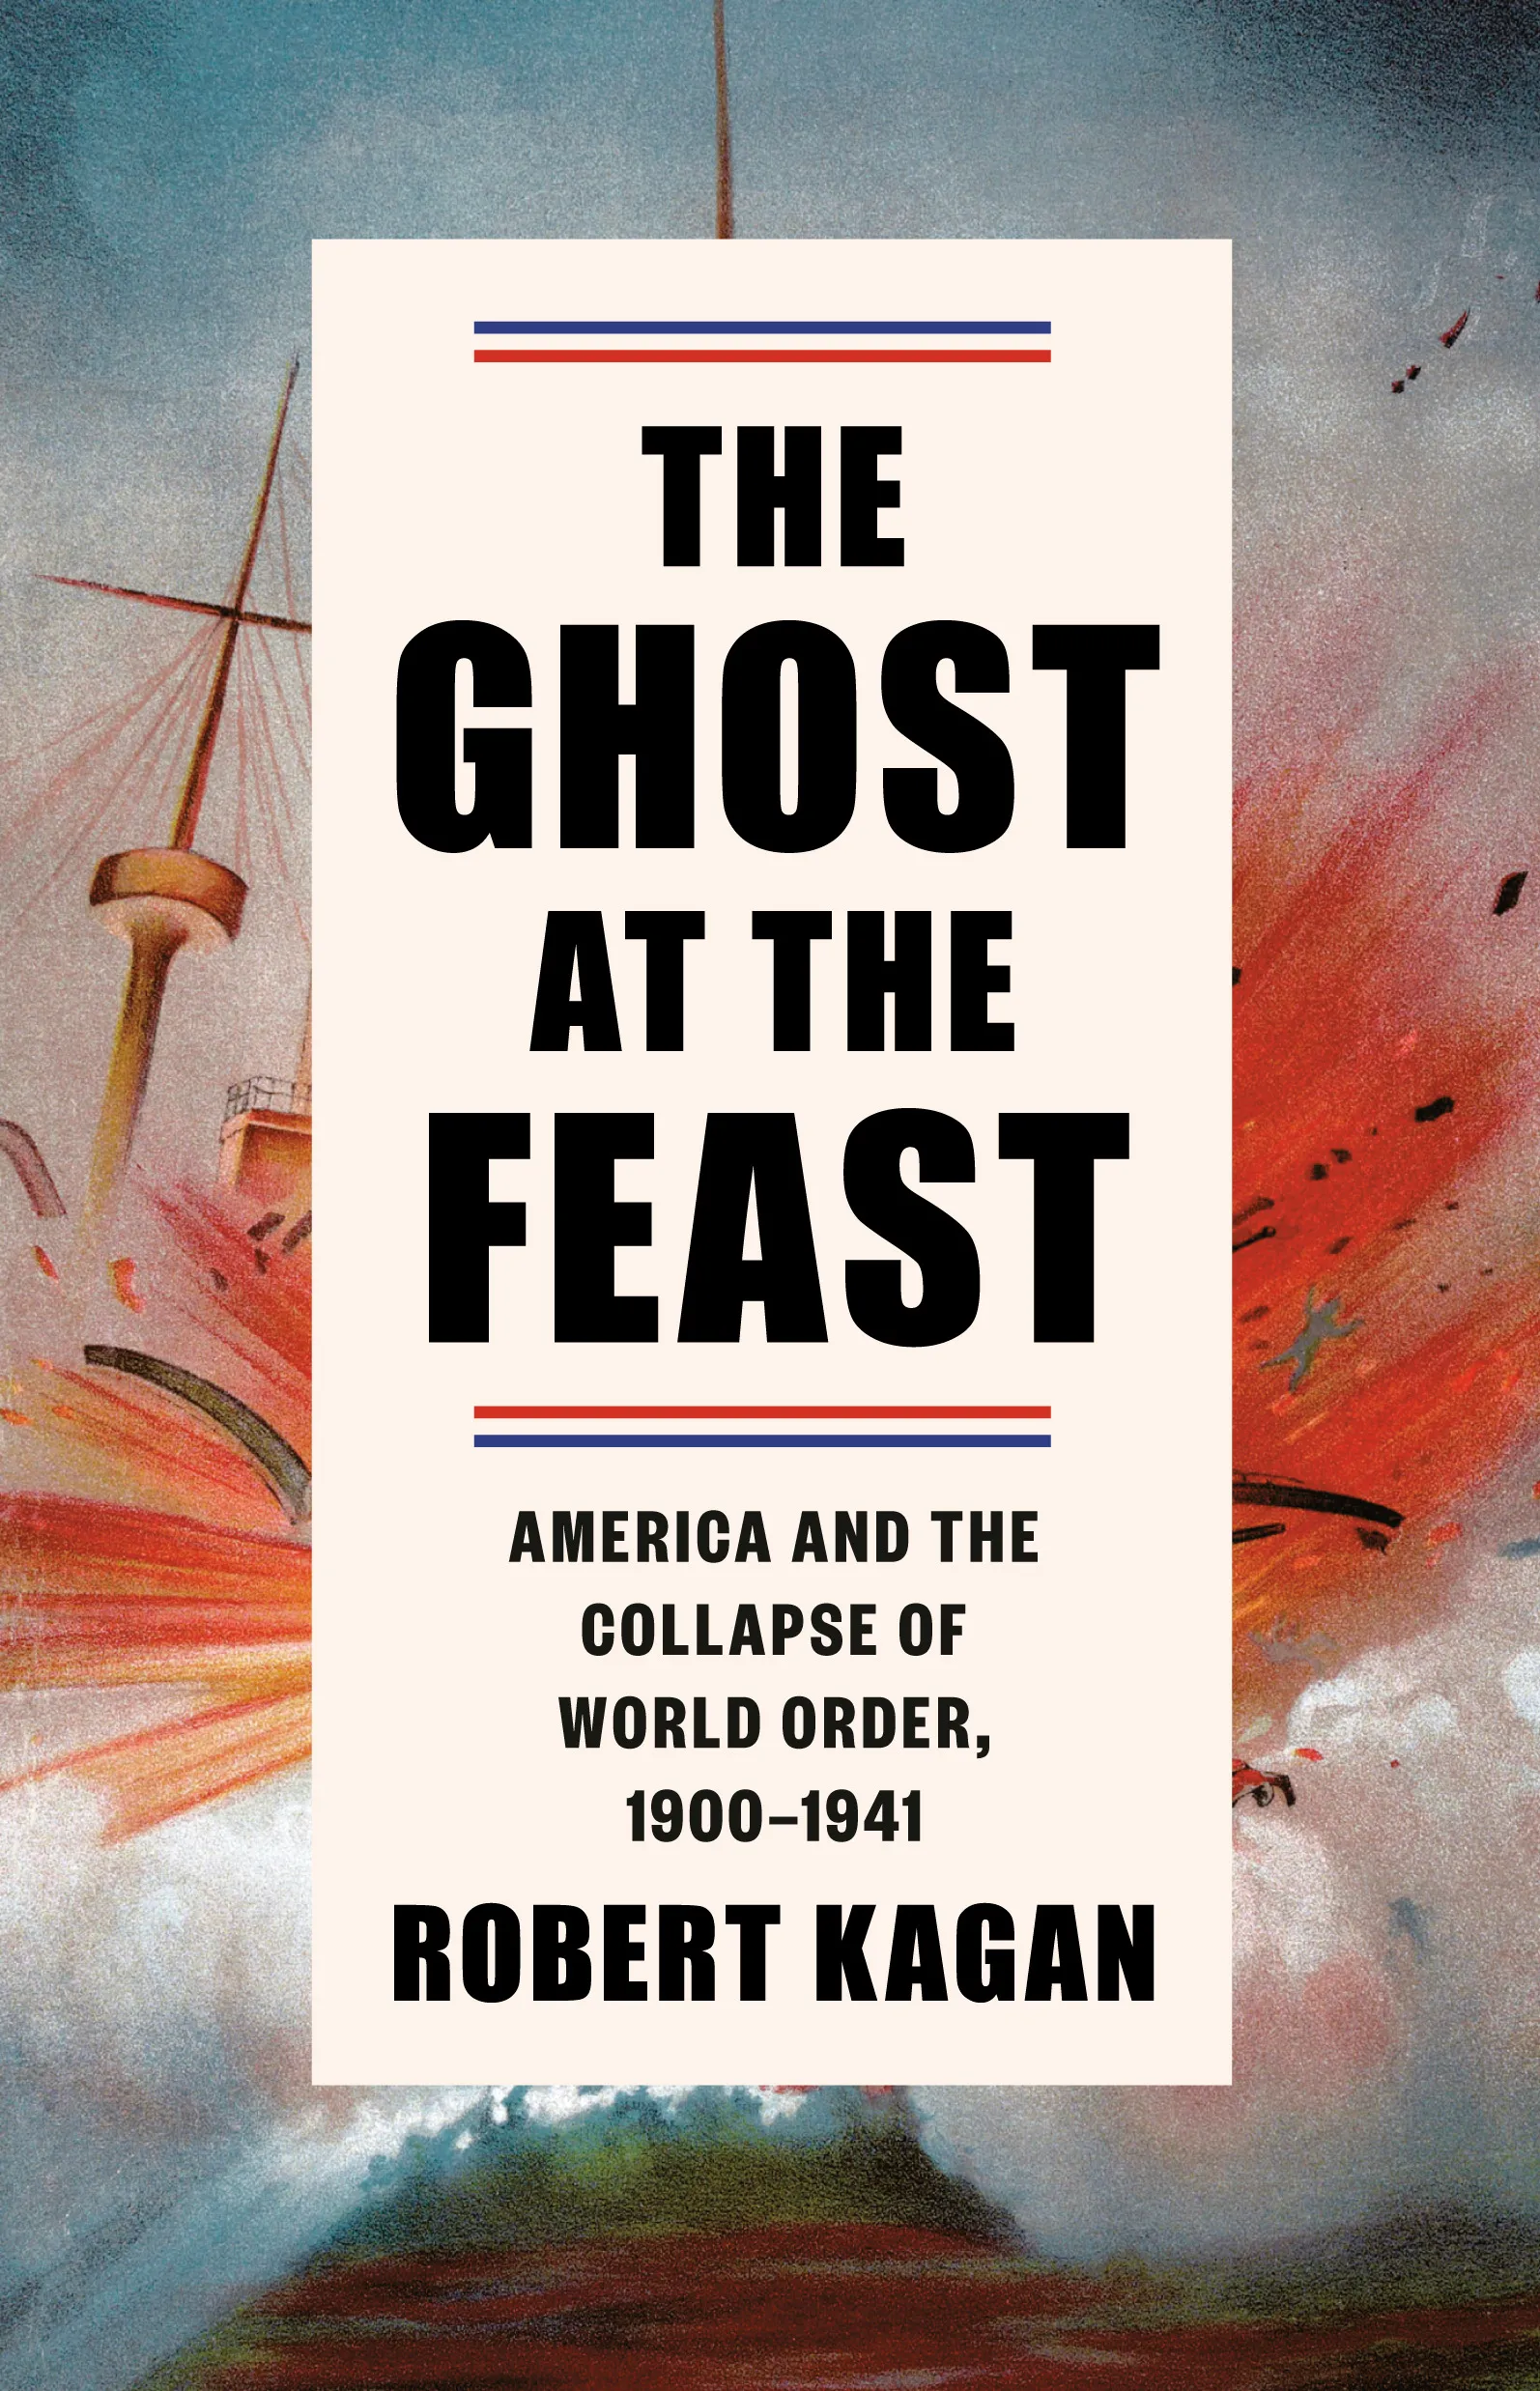 The Ghost at the Feast: America and the Collapse of World Order ...